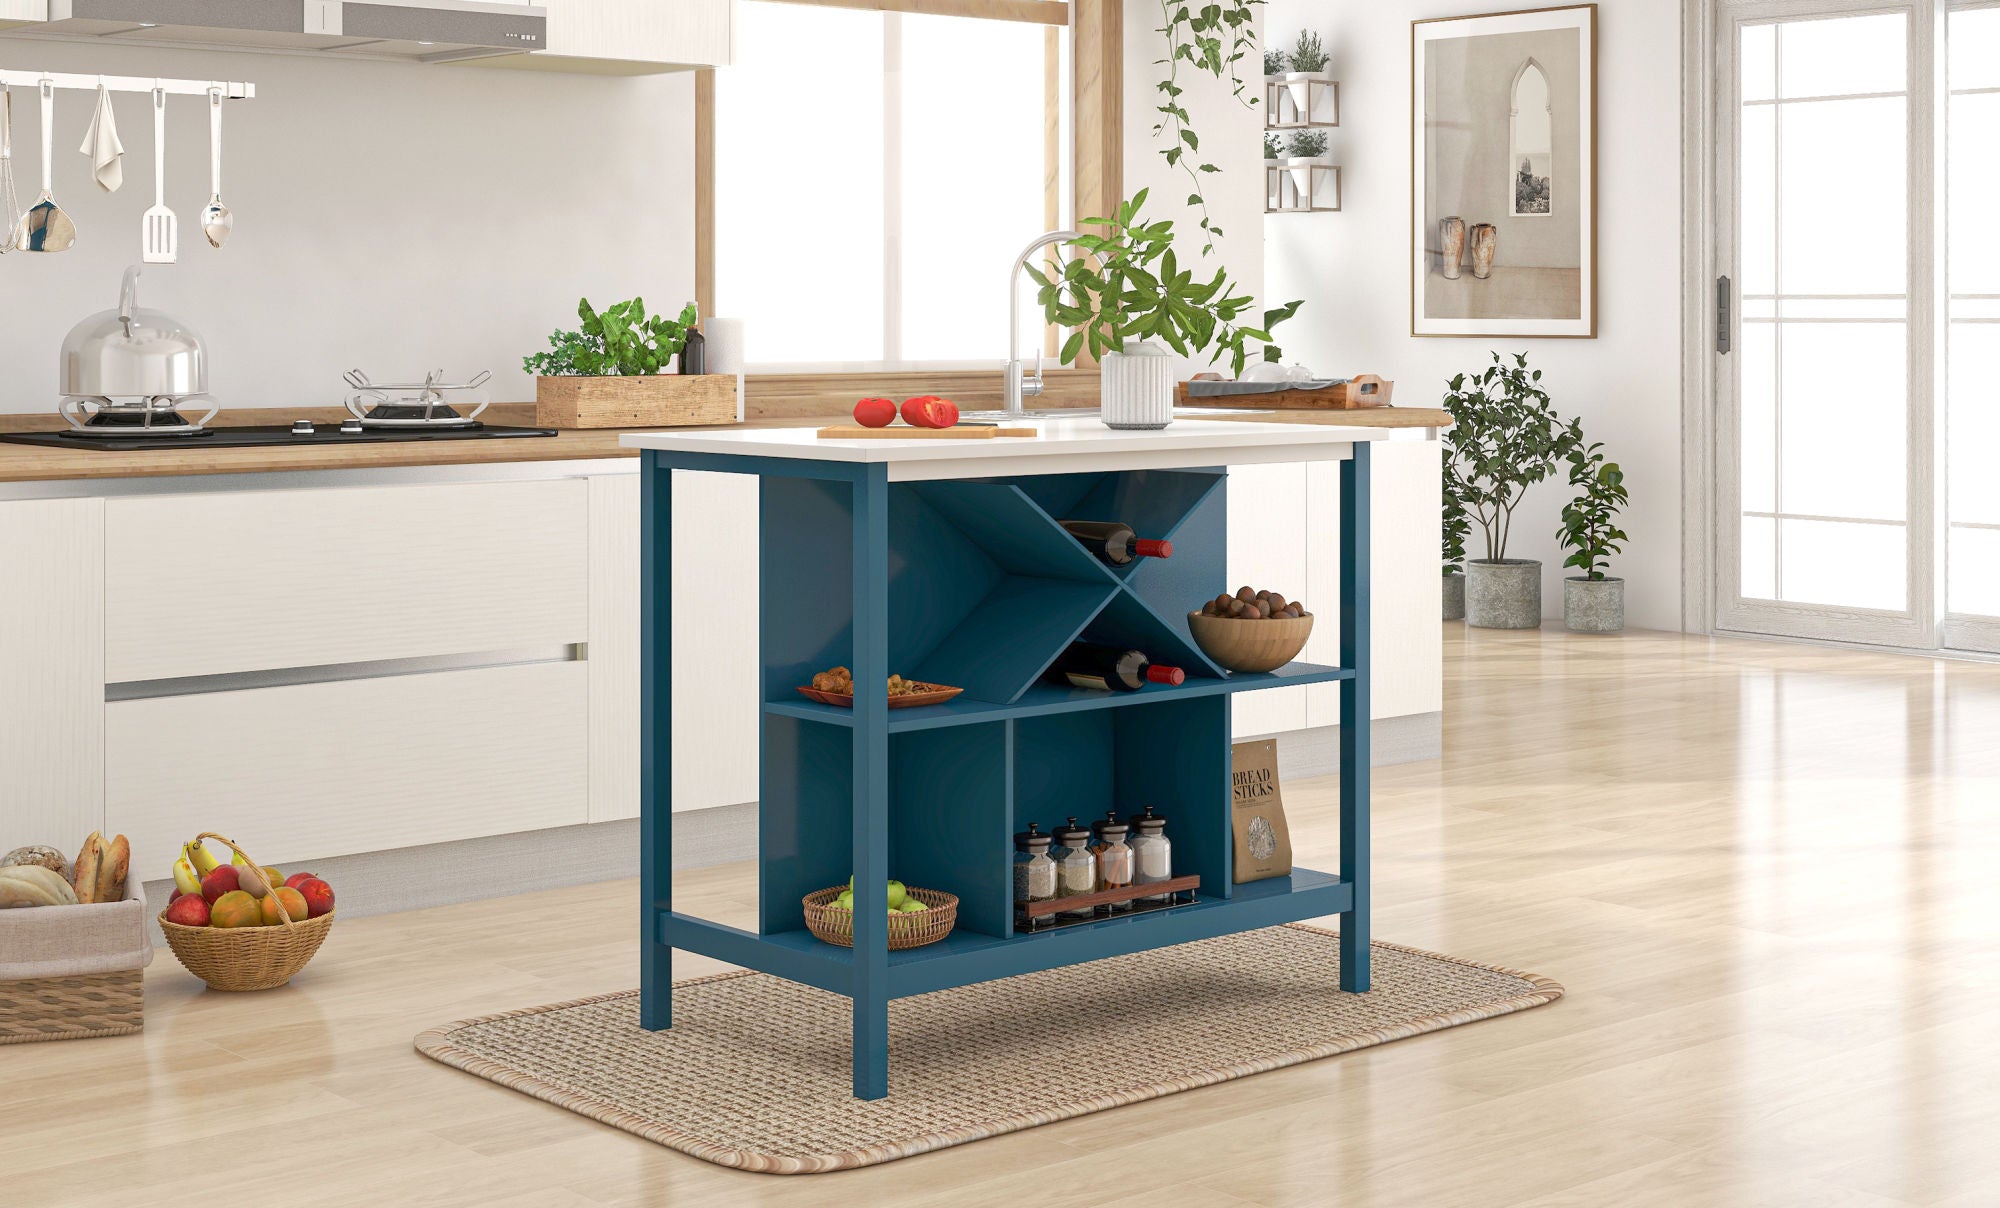 A modern kitchen with a Farmhouse Wood Stationary Counter Height Kitchen Island Dining Table on the blue island, featuring storage shelves and various vegetables and cooking ingredients on top and inside it.